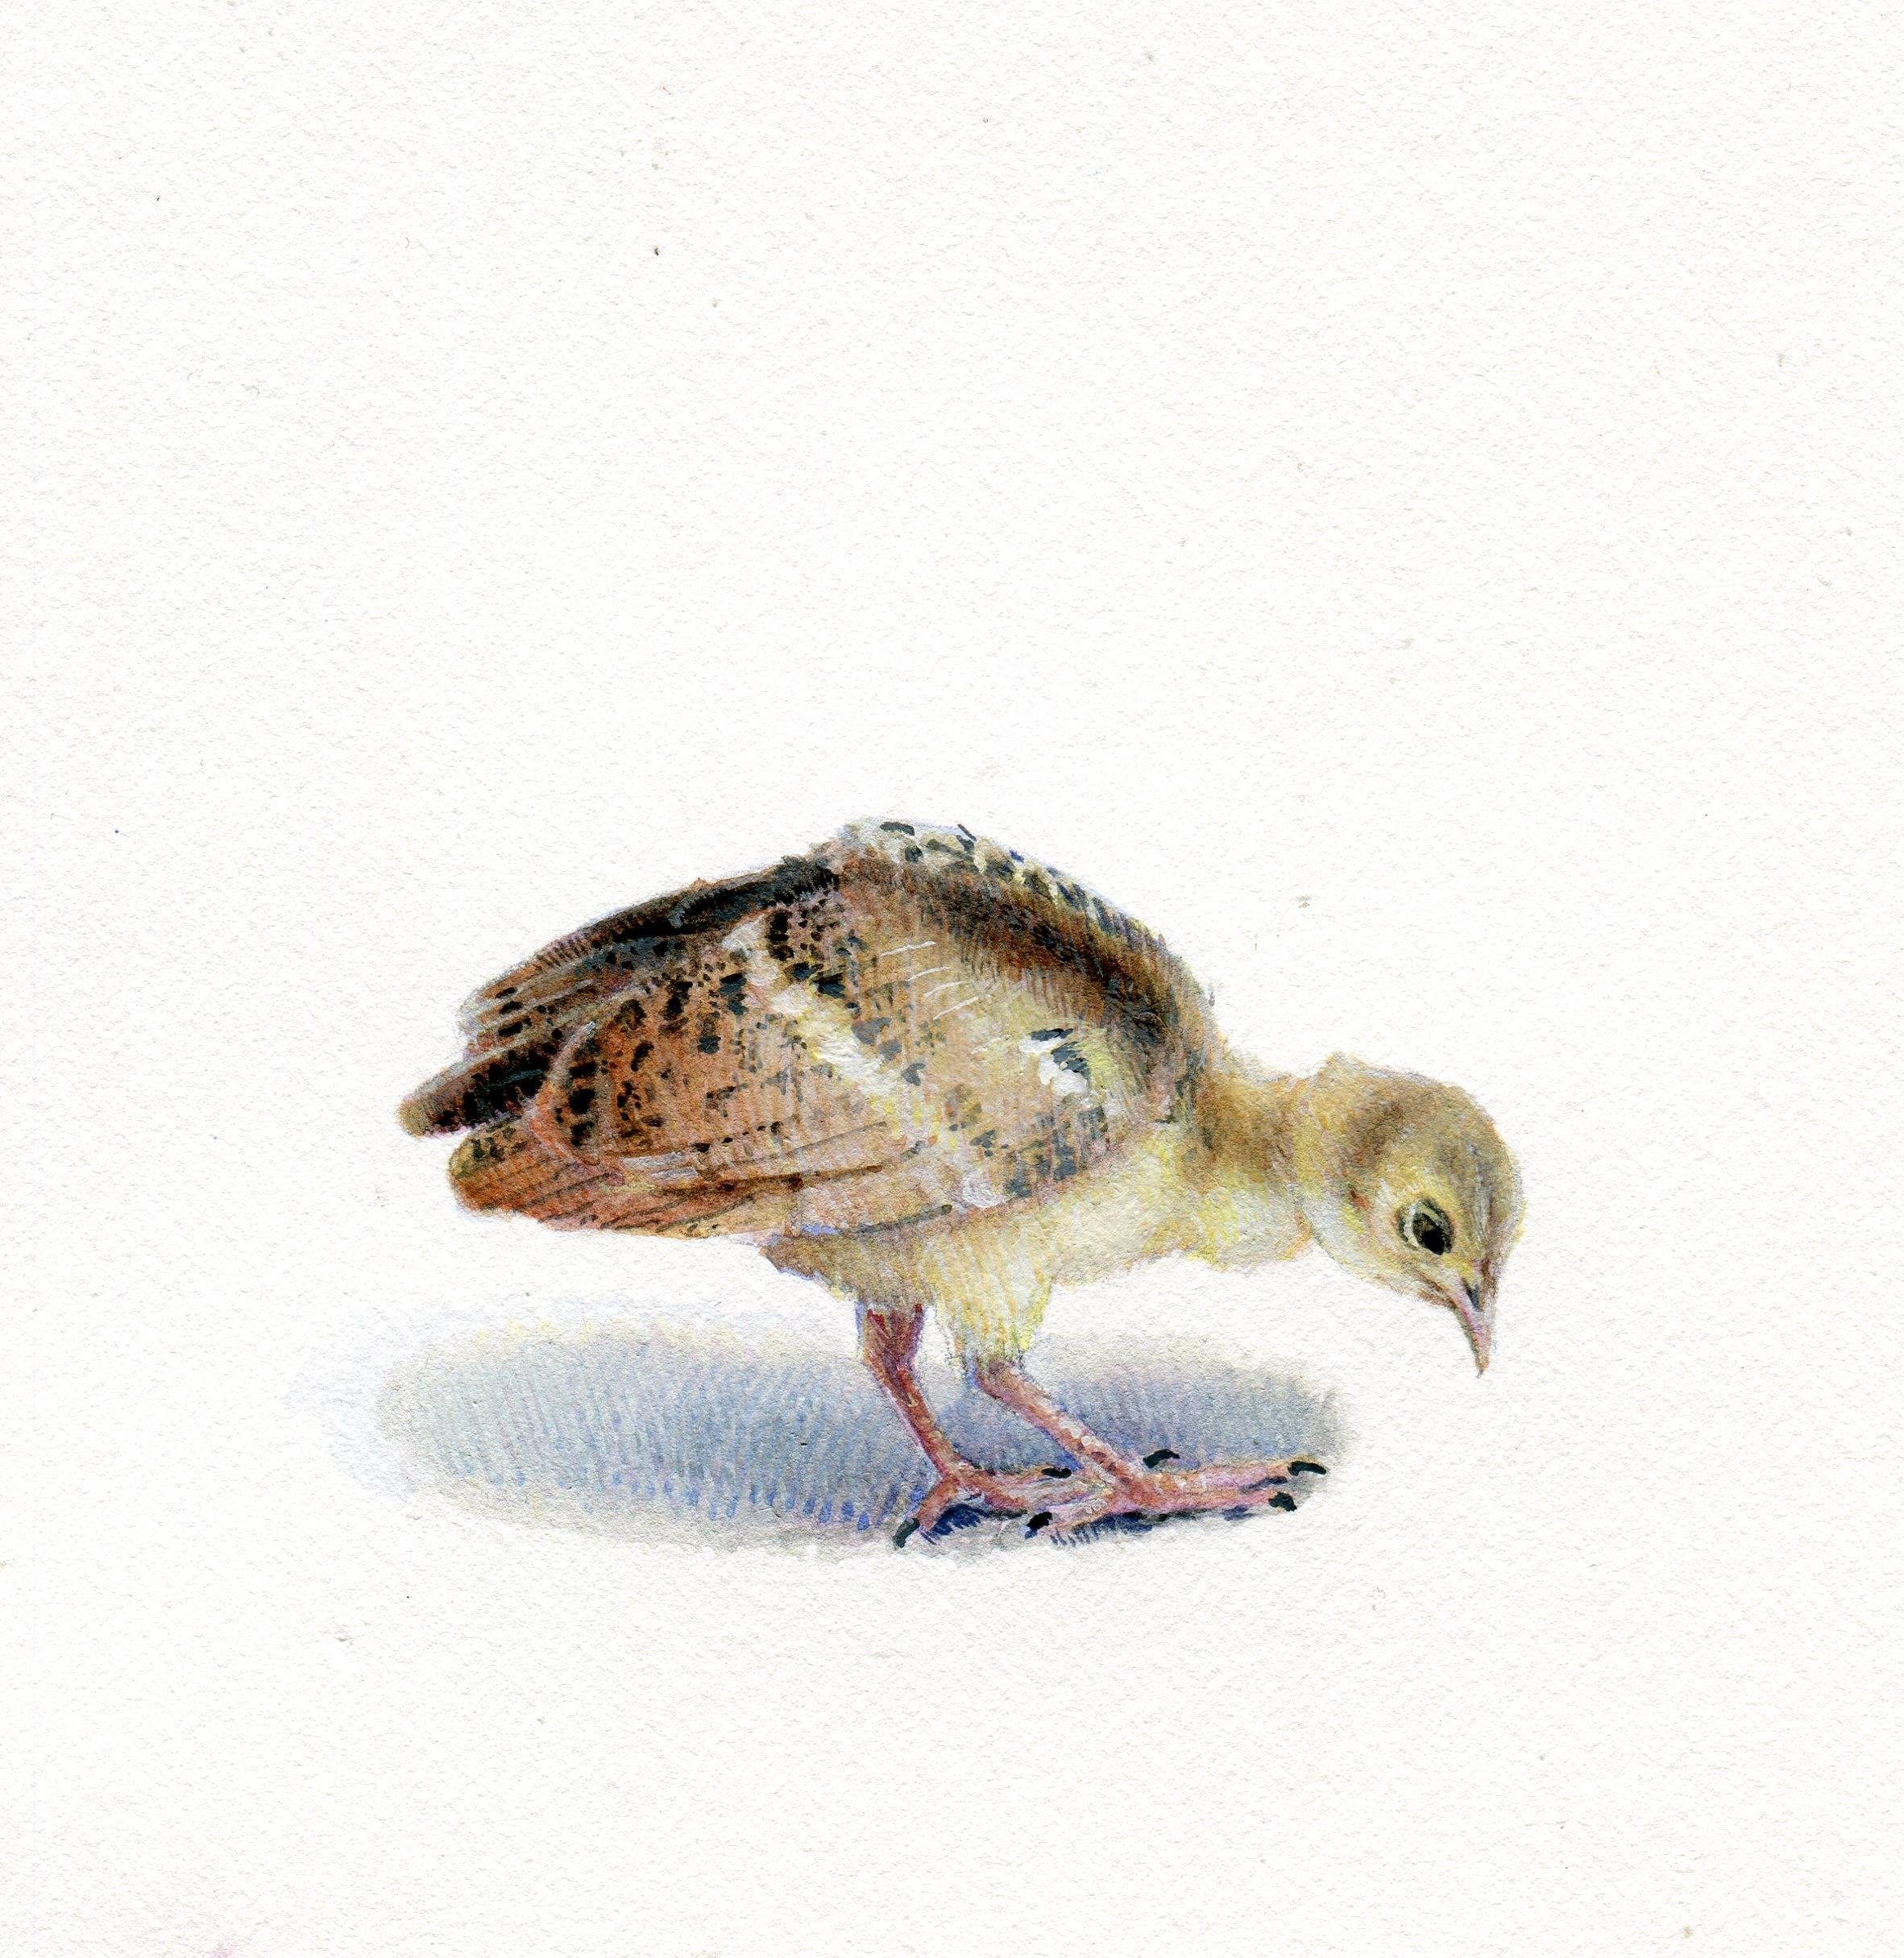 In her realist gouache on paper animal miniature, "Peacock Chick," 2018, Dina Brodsky considers the quiet simplicity of youth. Her gentle handling of the chick's downy plumage lends an added weightlessness and fragility to her subject. The bird